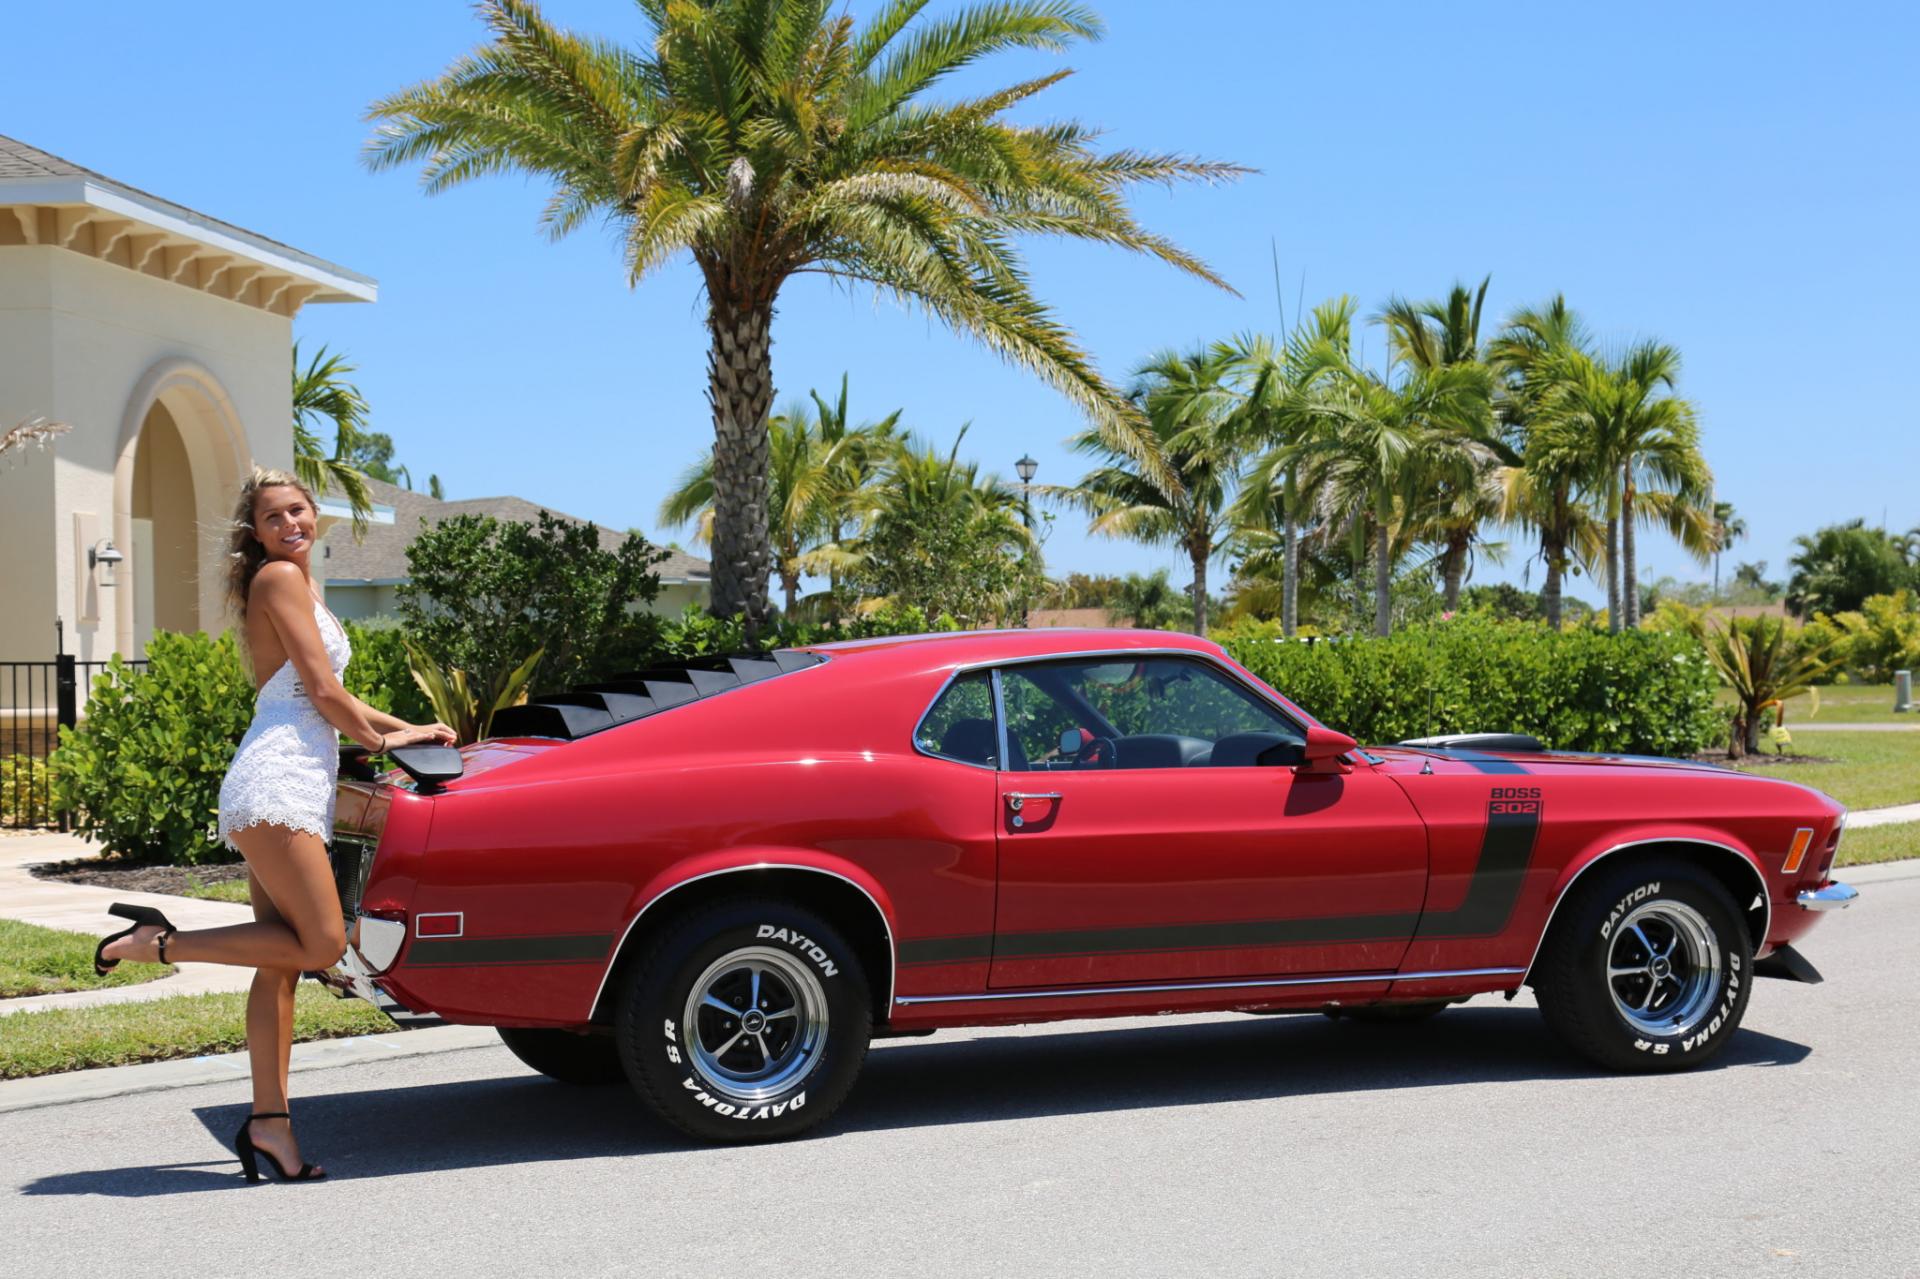 Used 1970 Ford Mustang 302 Boss for sale Sold at Muscle Cars for Sale Inc. in Fort Myers FL 33912 3